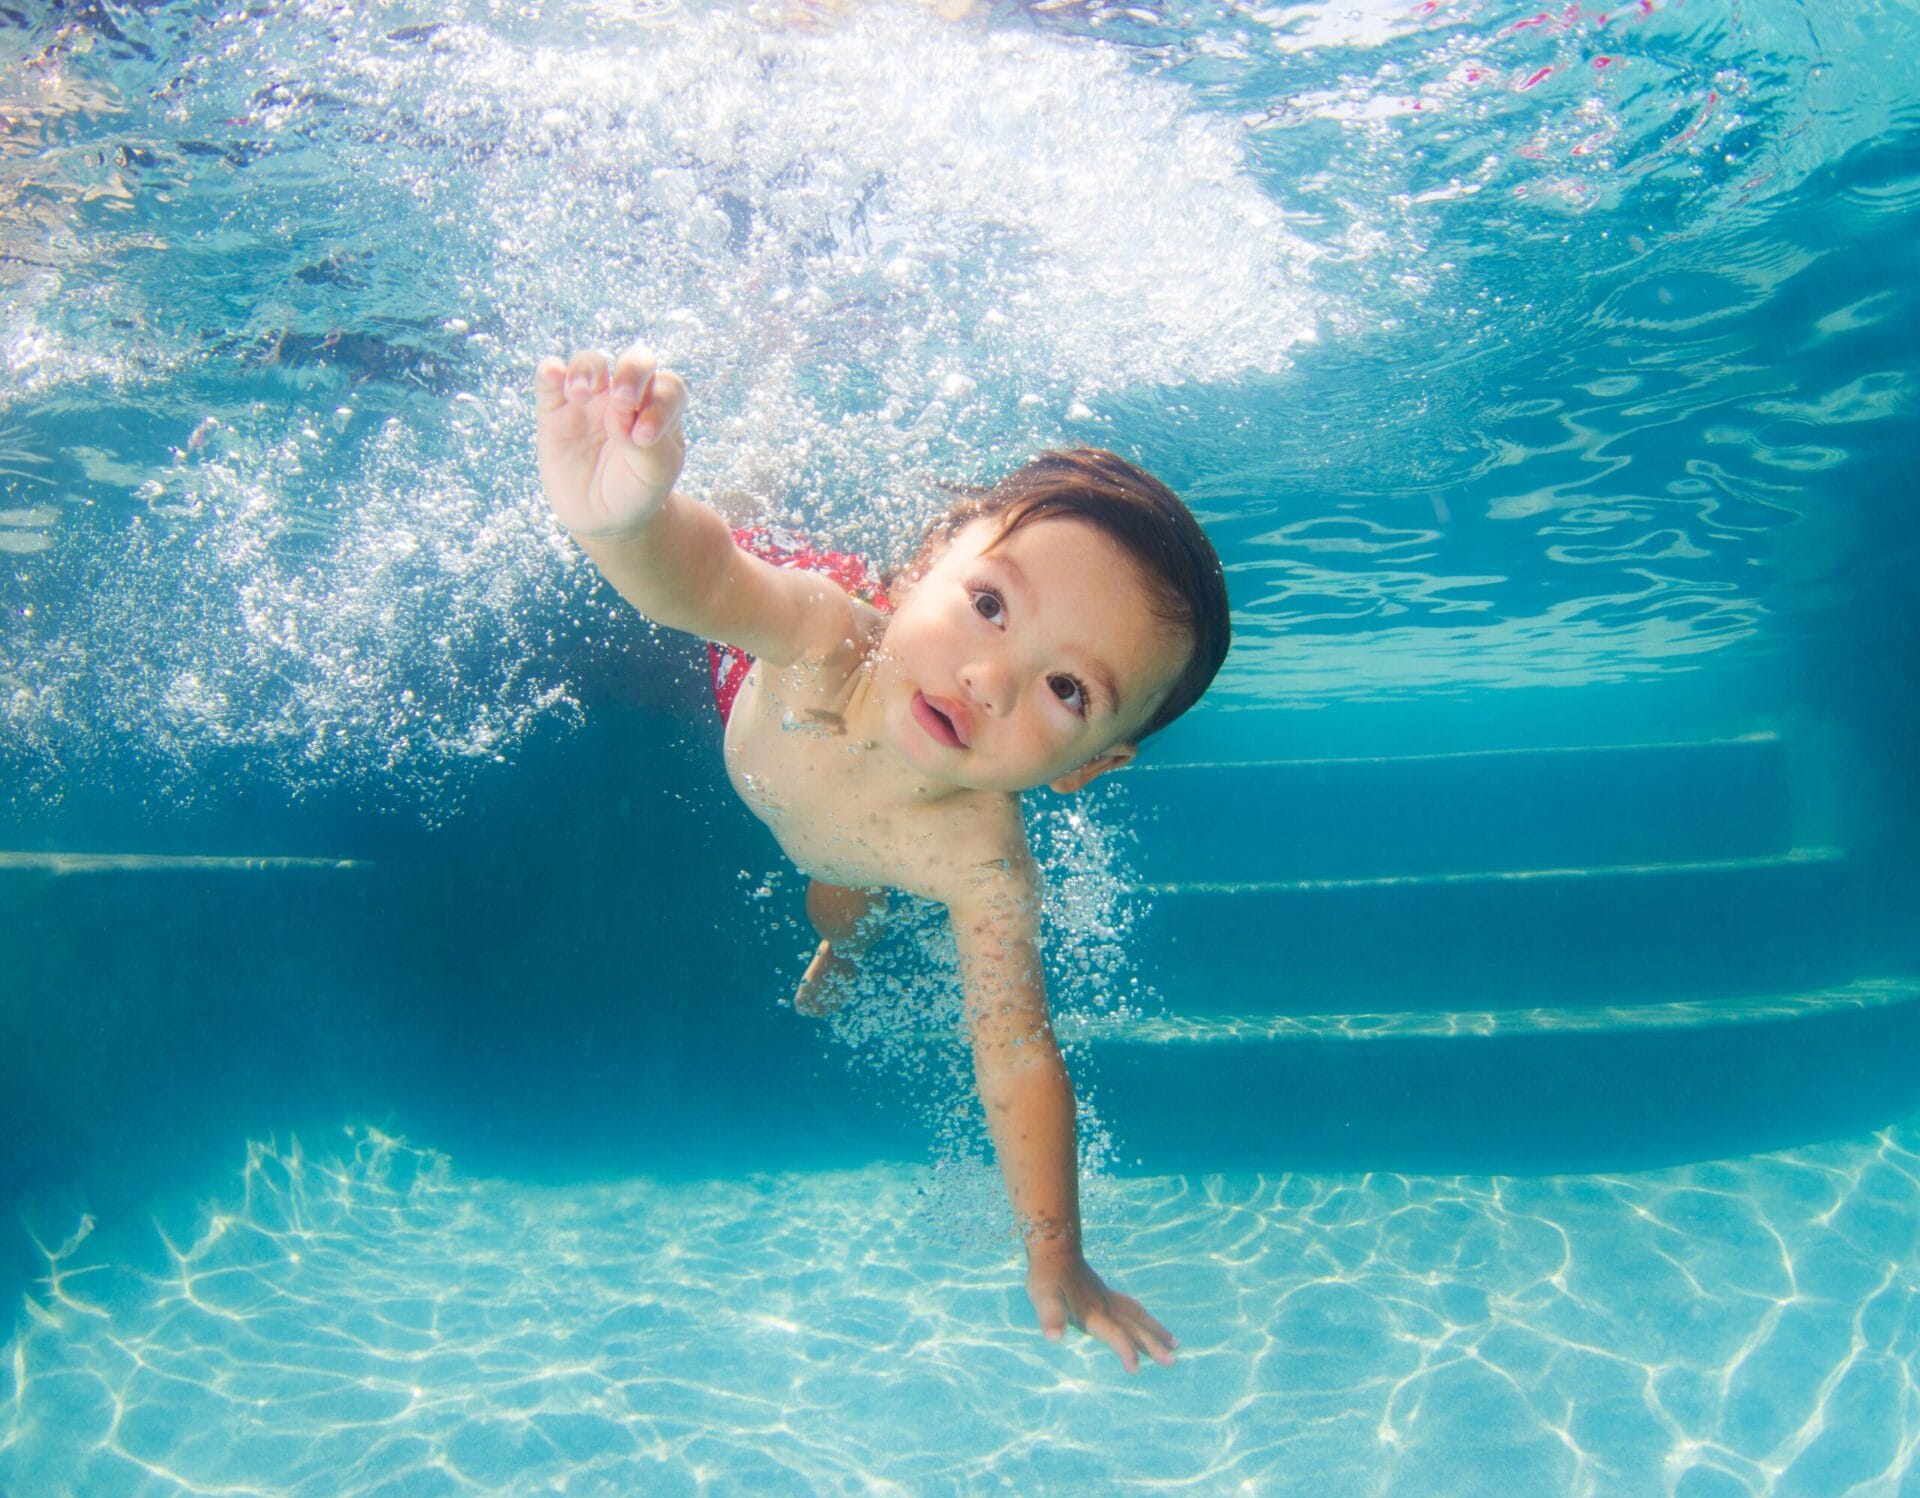 A boy reaching out as he swims underwater